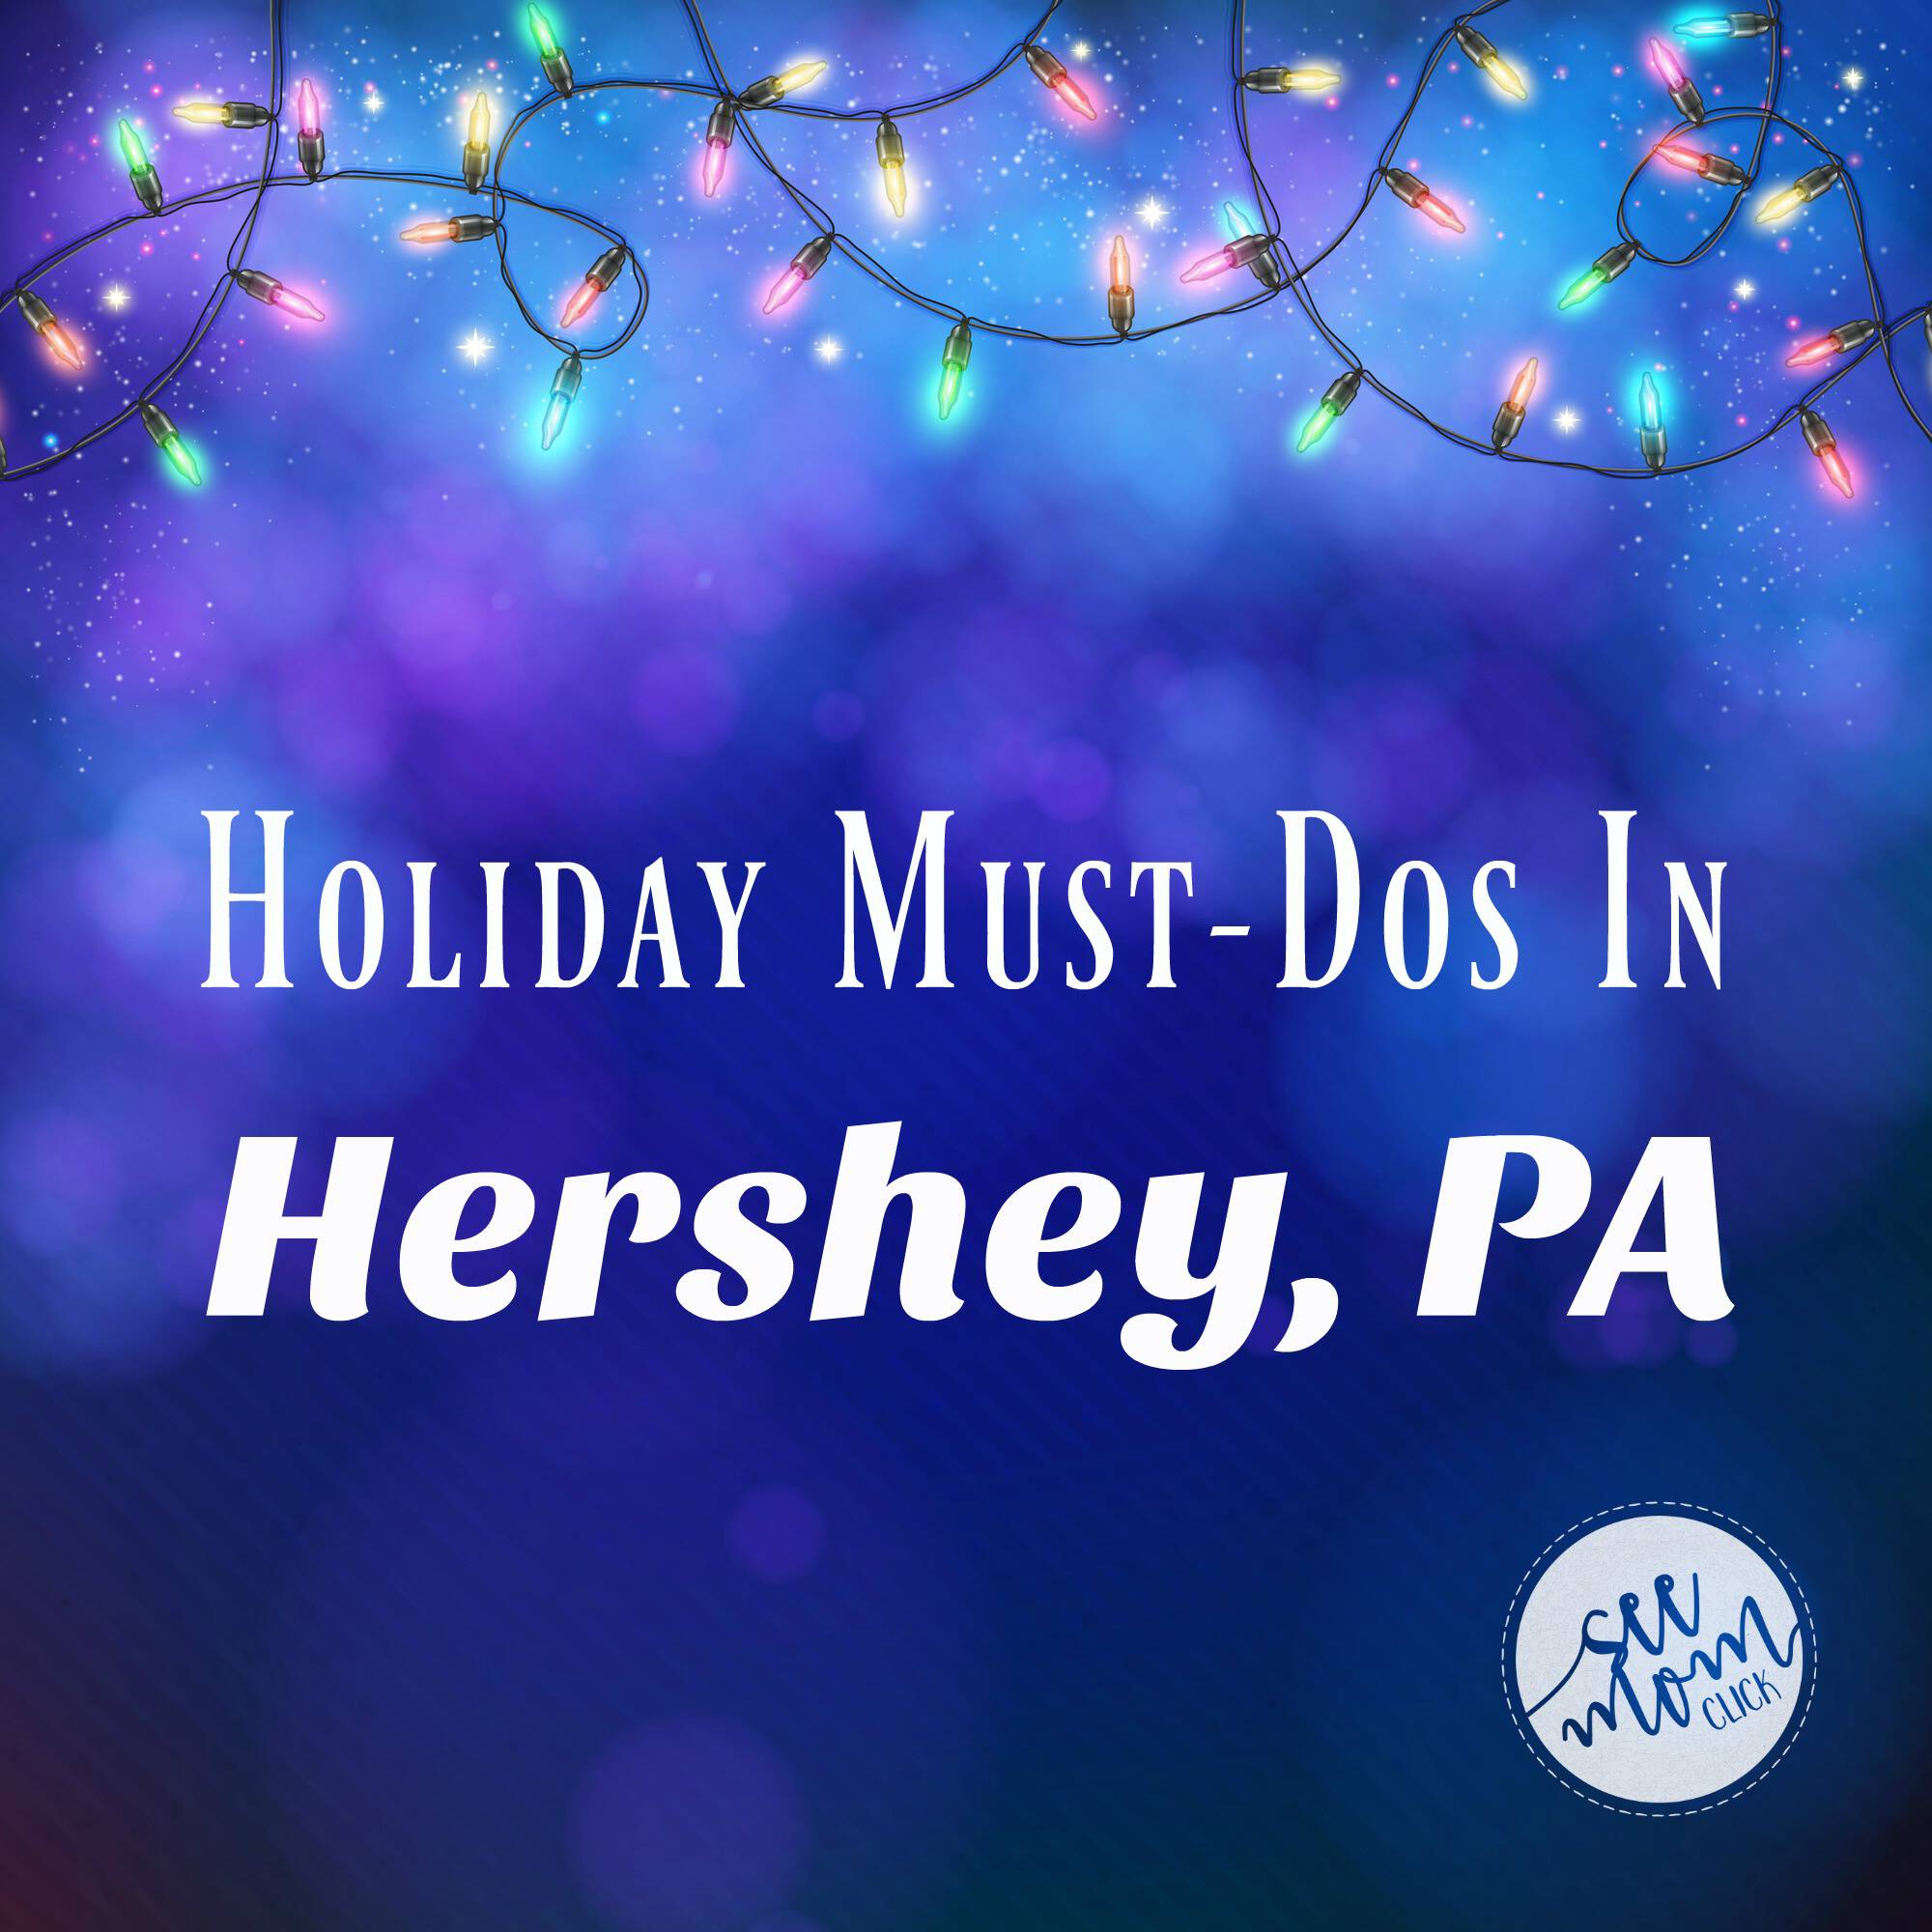 So much to do in The Sweetest Place on Earth this holiday season. Here's the complete list of must-dos in Hershey, PA, our top family travel destination.